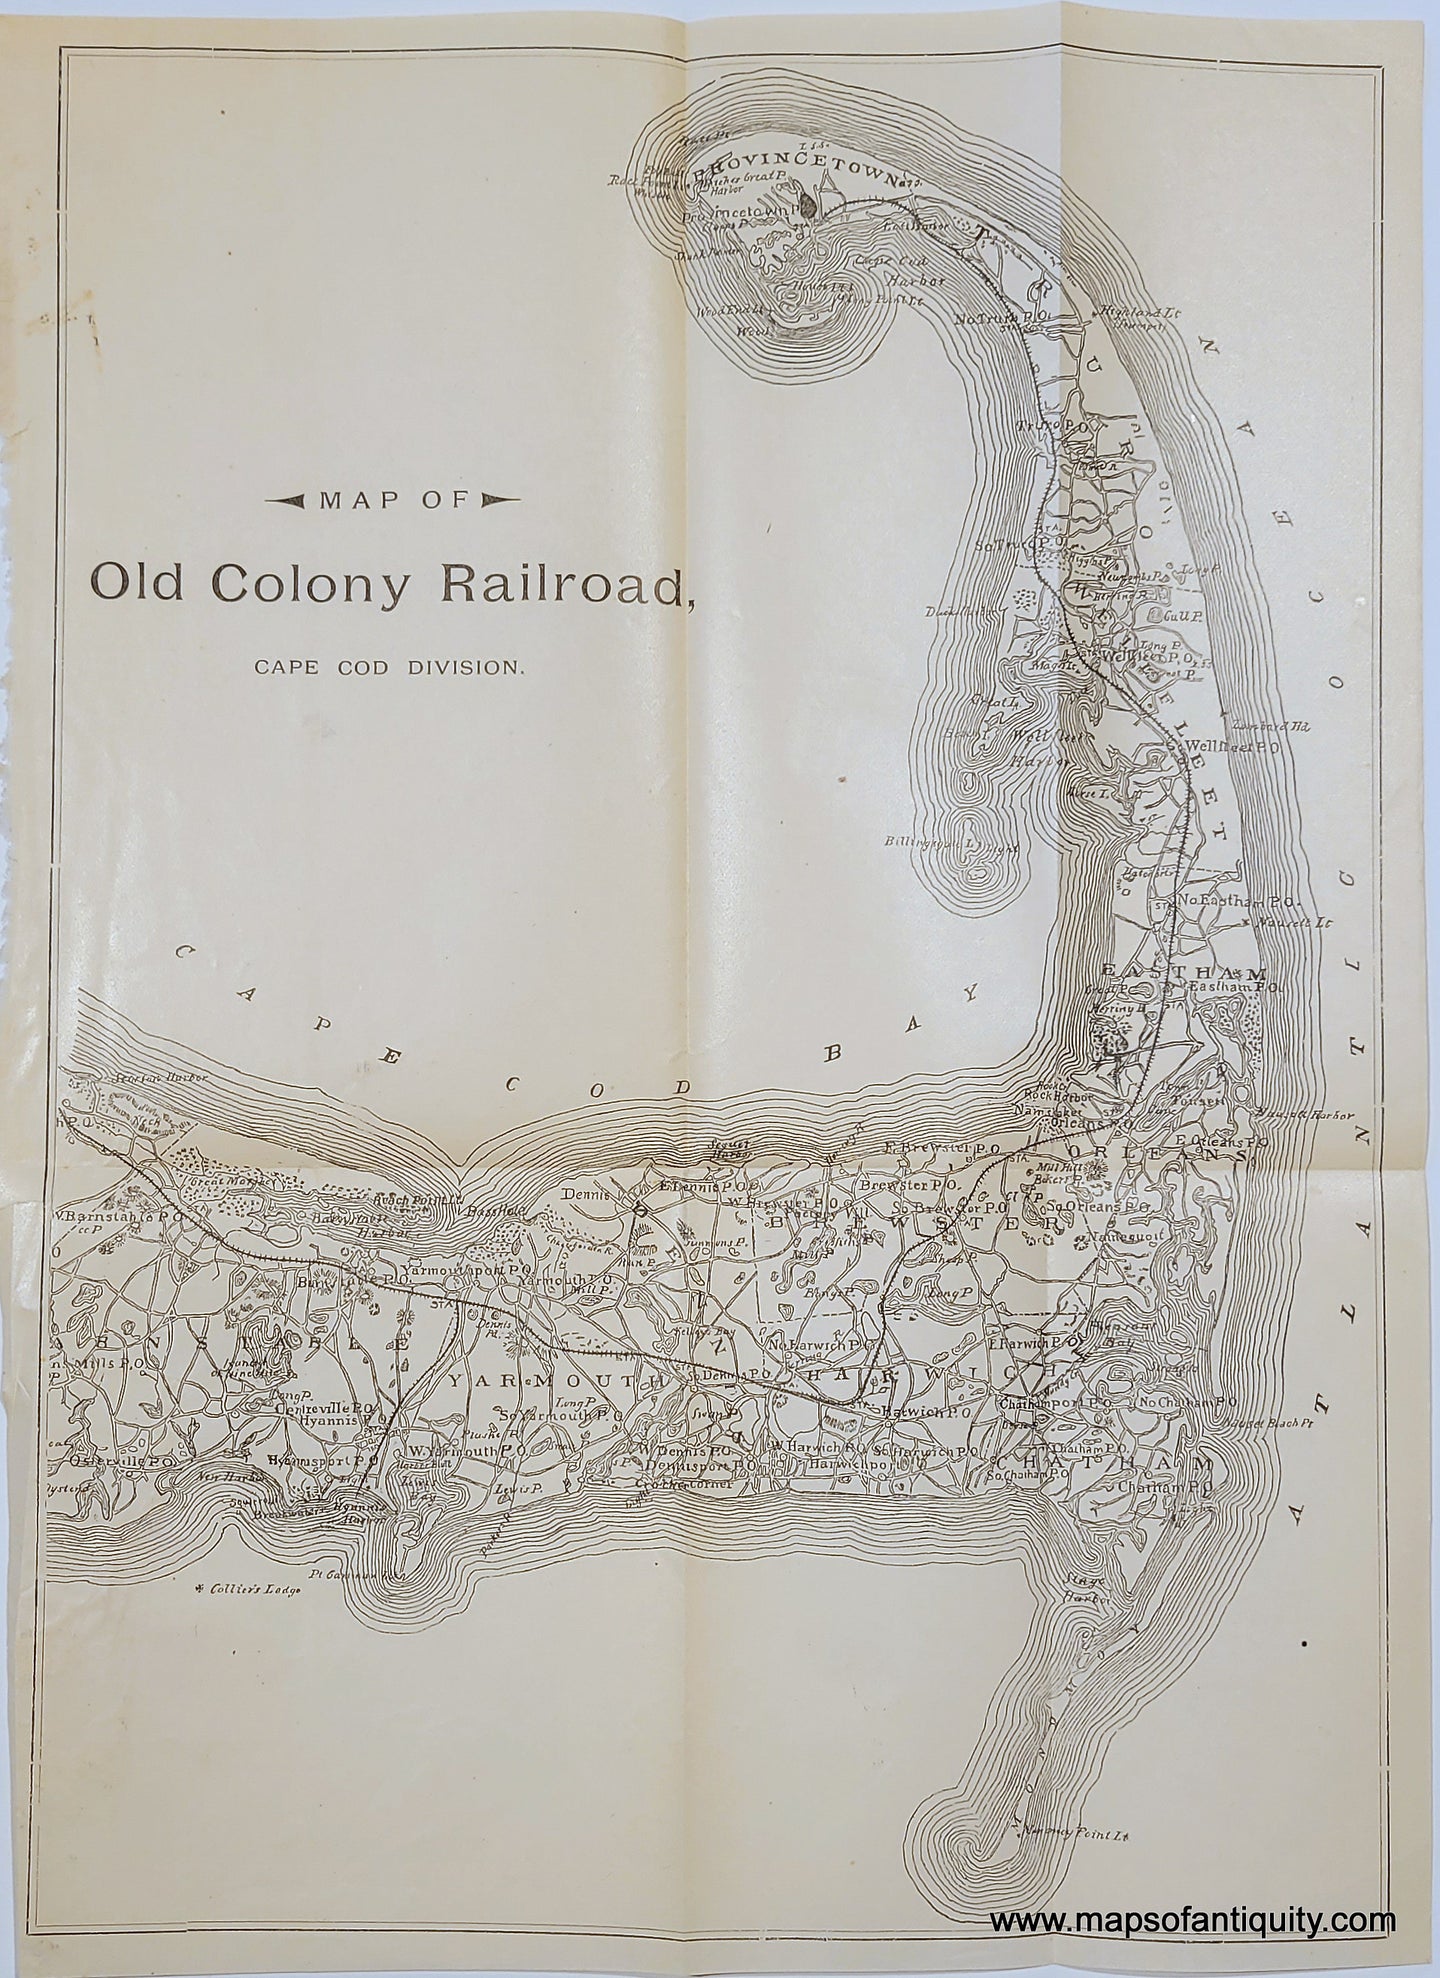 Antique-Uncolored-Map-Map-of-Old-Colony-Railroad-Cape-Cod-Division-Cape-Cod--1886-1880s-19th-century-Maps-Of-Antiquity